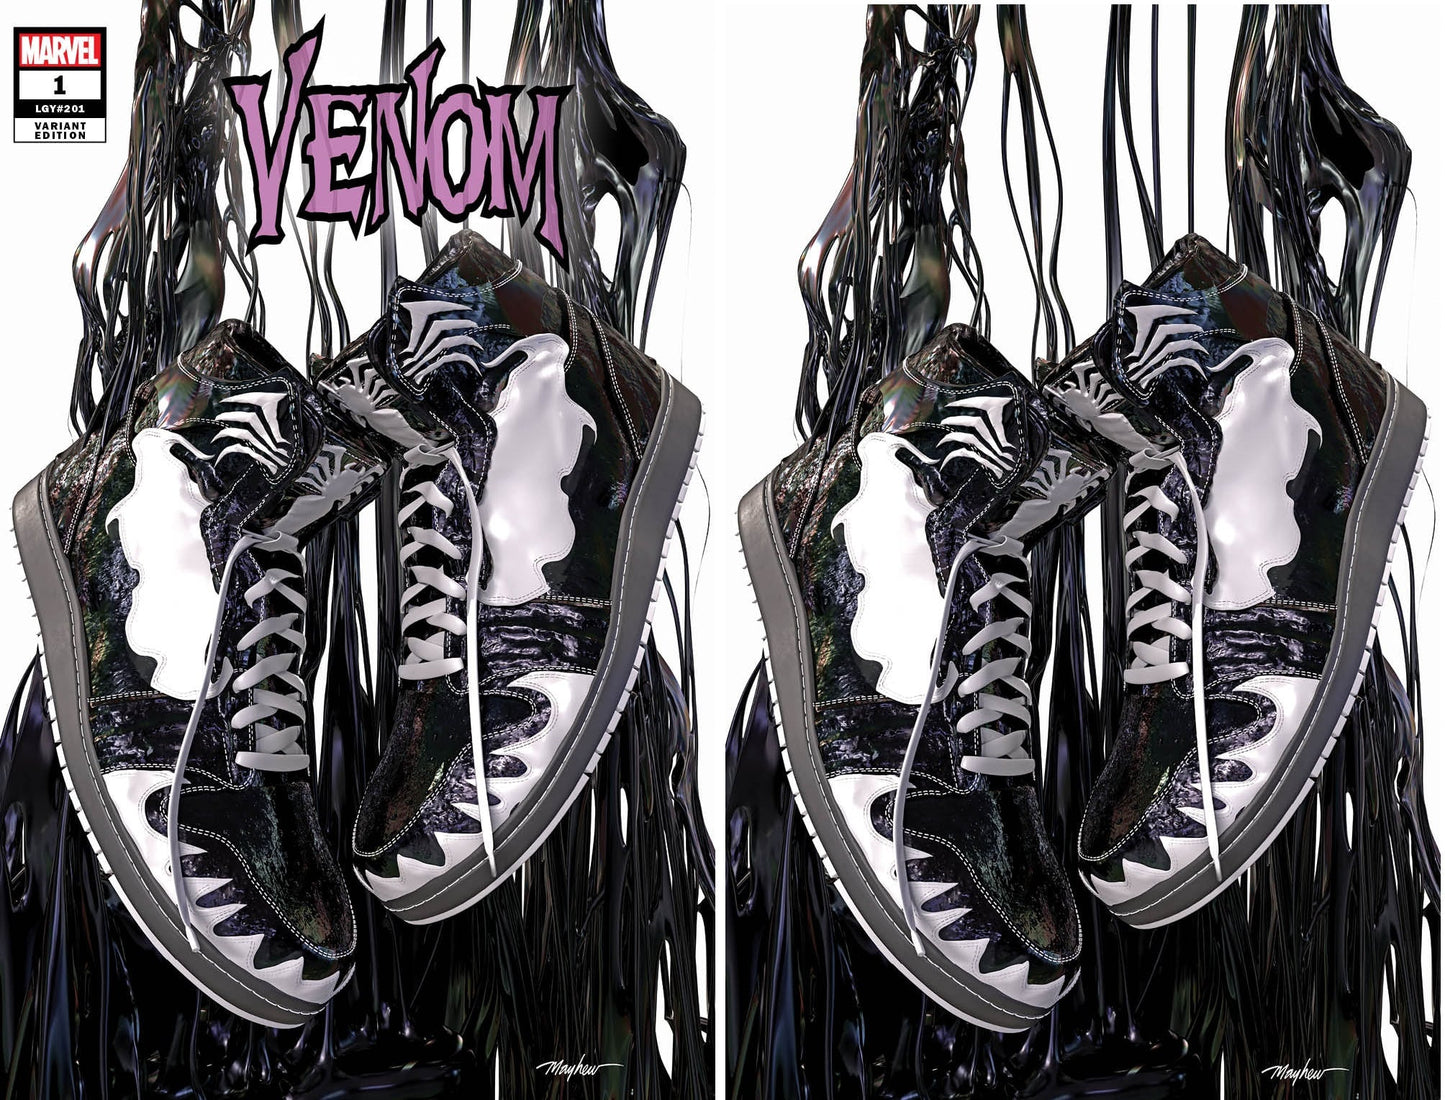 VENOM #1 MIKE MAYHEW SNEAKERHEADS TRADE/VIRGIN VARIANT SET LIMITED TO 1000 SETS